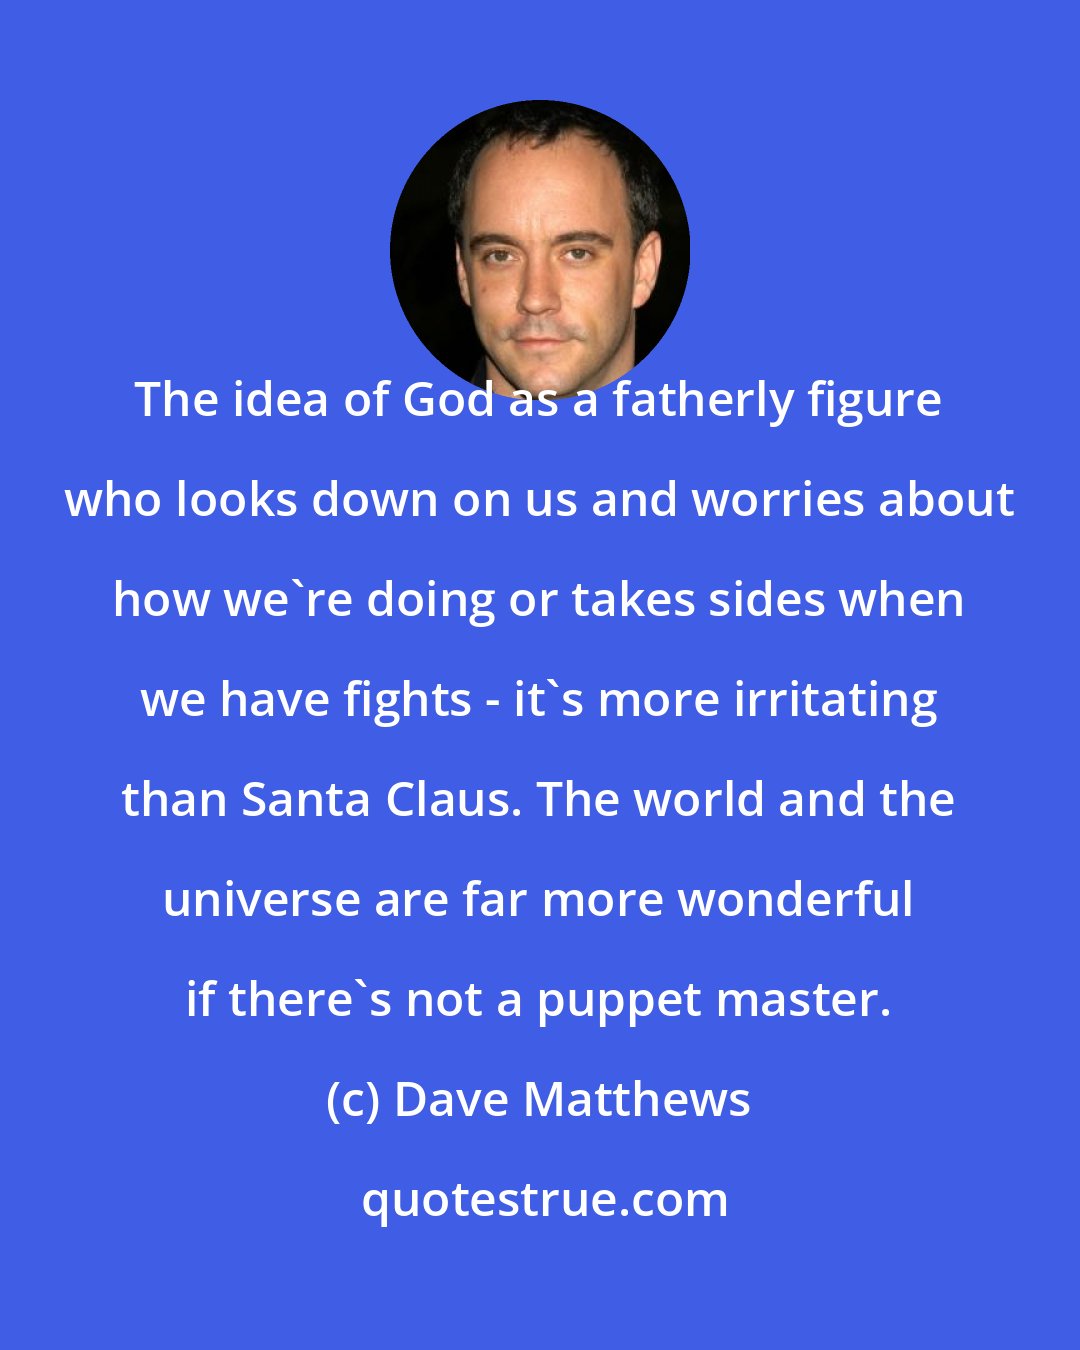 Dave Matthews: The idea of God as a fatherly figure who looks down on us and worries about how we're doing or takes sides when we have fights - it's more irritating than Santa Claus. The world and the universe are far more wonderful if there's not a puppet master.